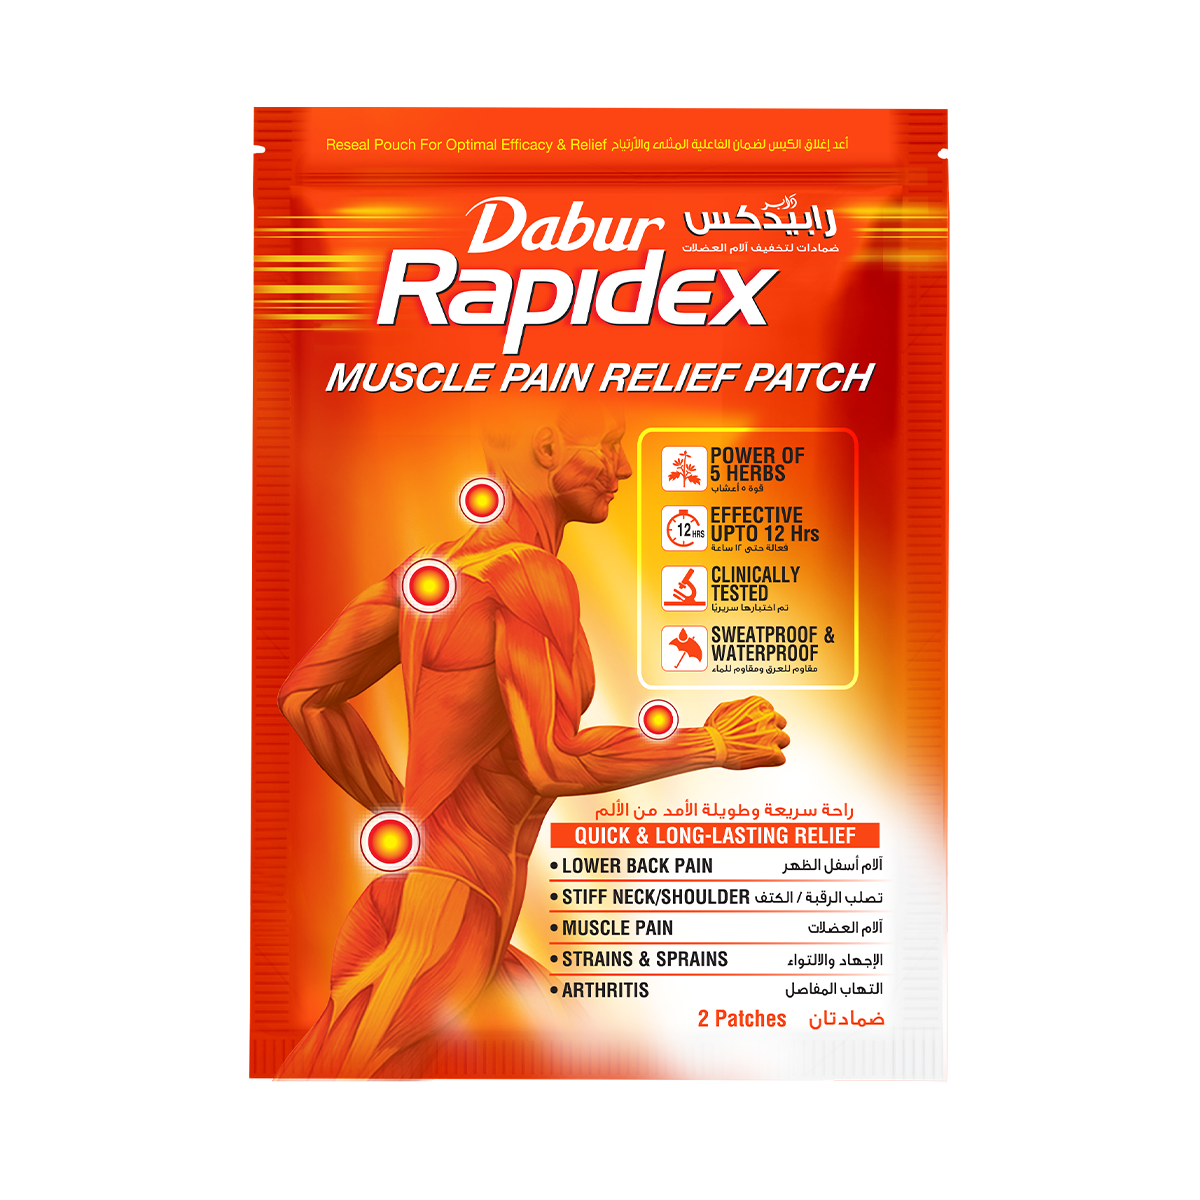 Dabur Rapidex Pain Relief Patches and Spray Combo